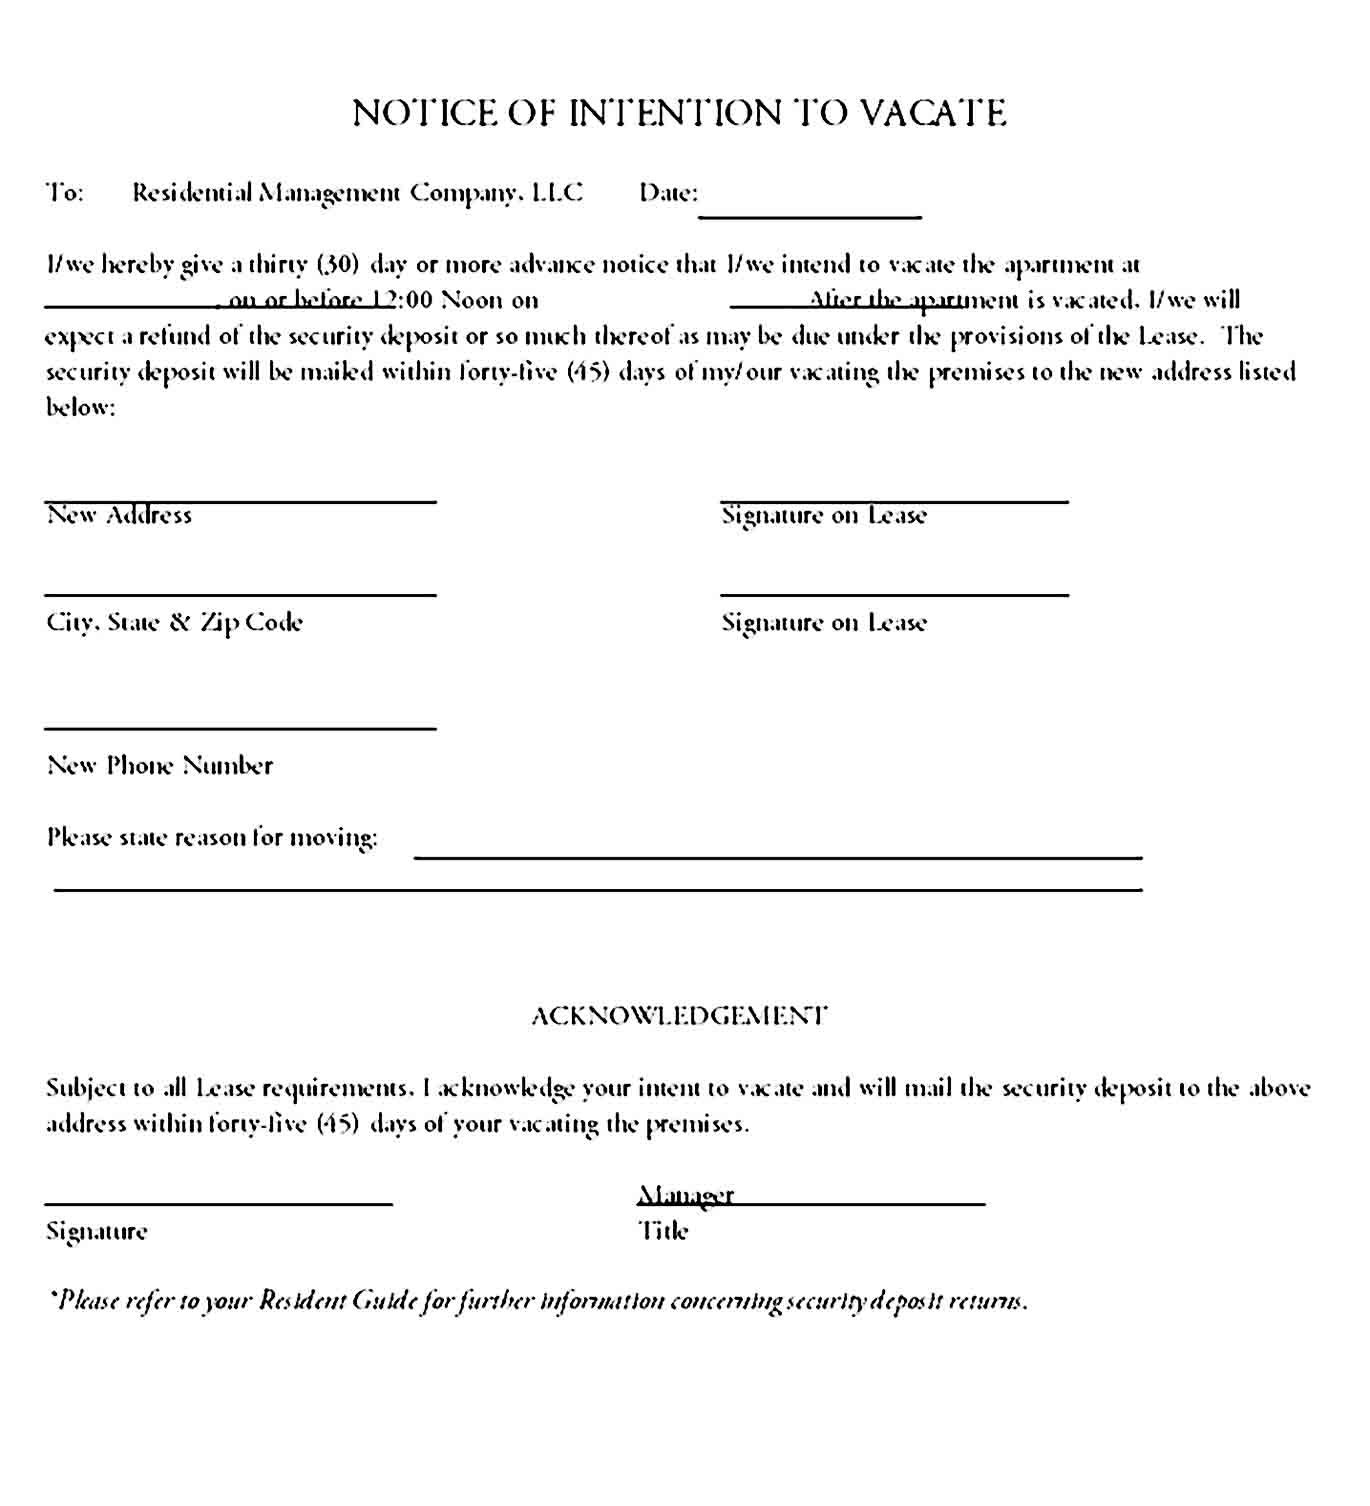 Notice of intention to vacate